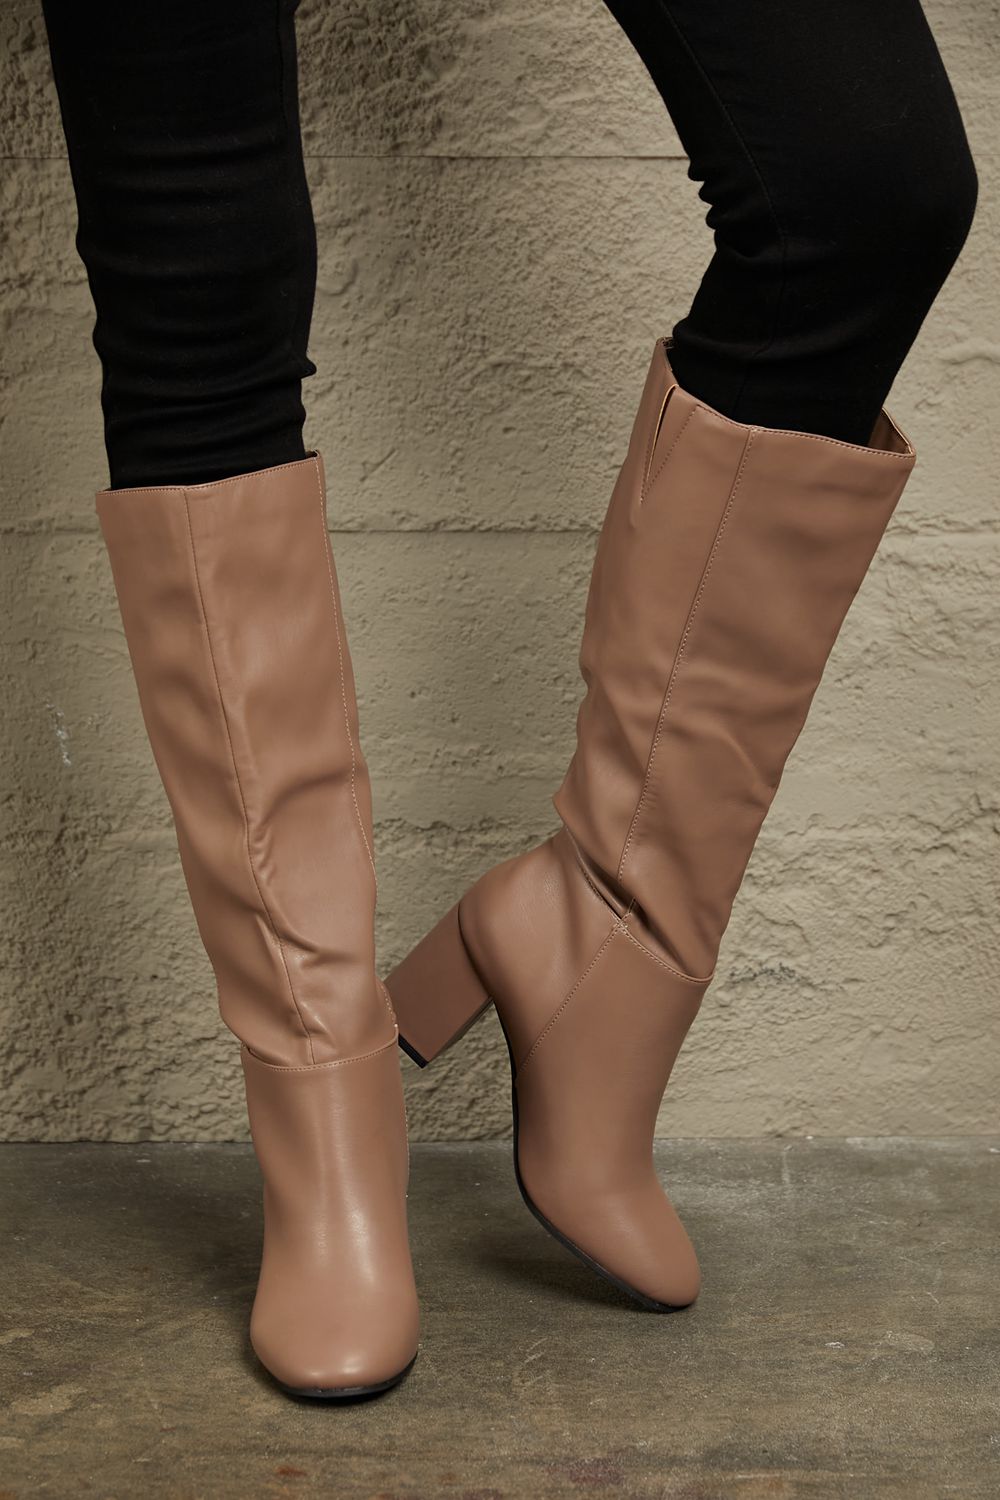 Shoes: East Lion Corp Block Heel Knee High Boots